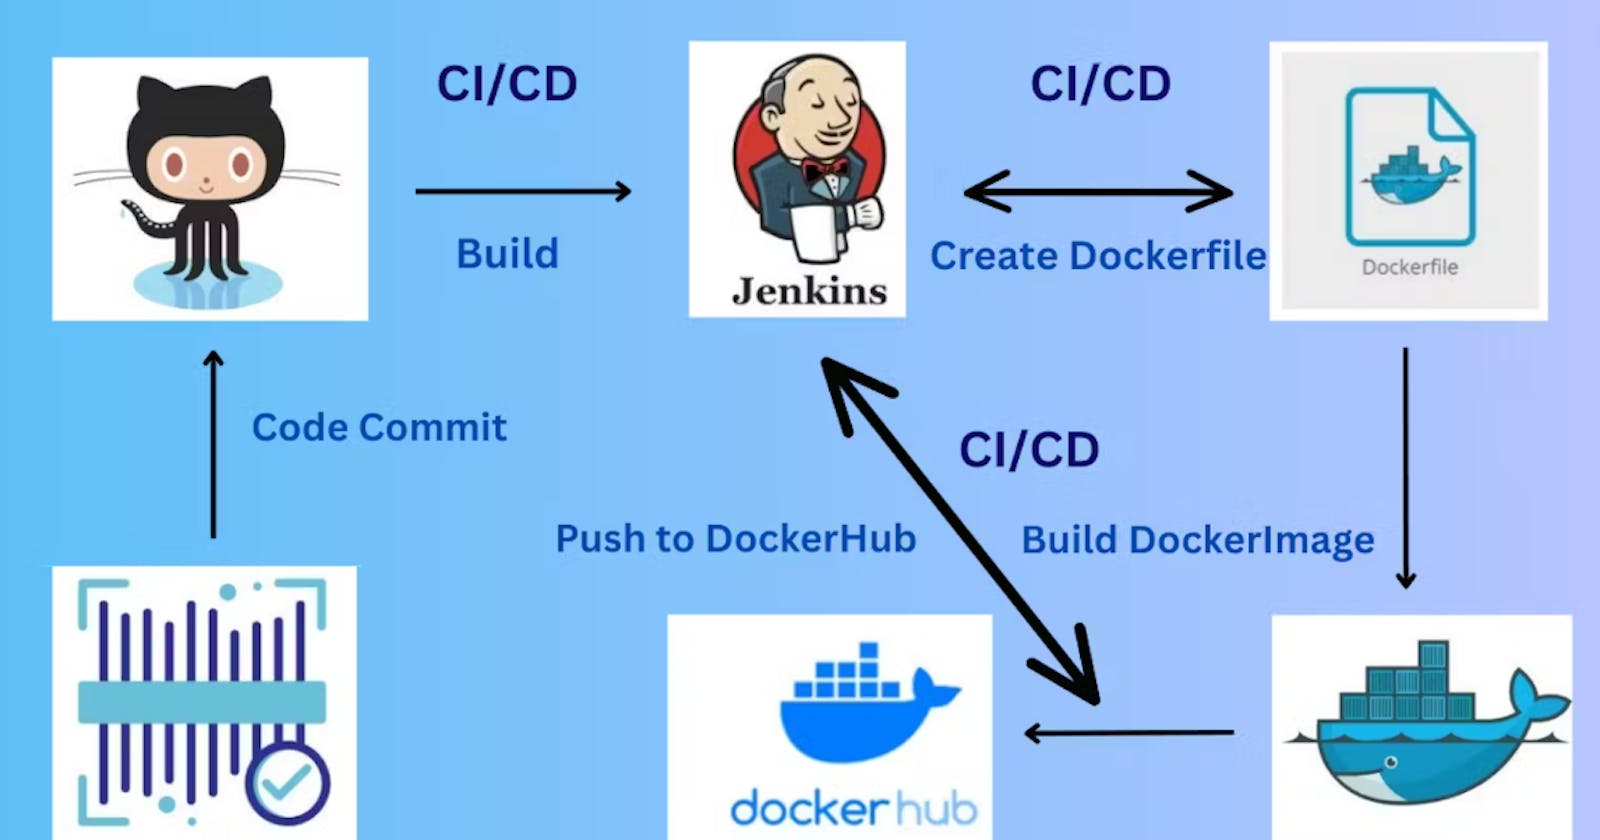 Day 24 Task: Complete Jenkins CI/CD Project.